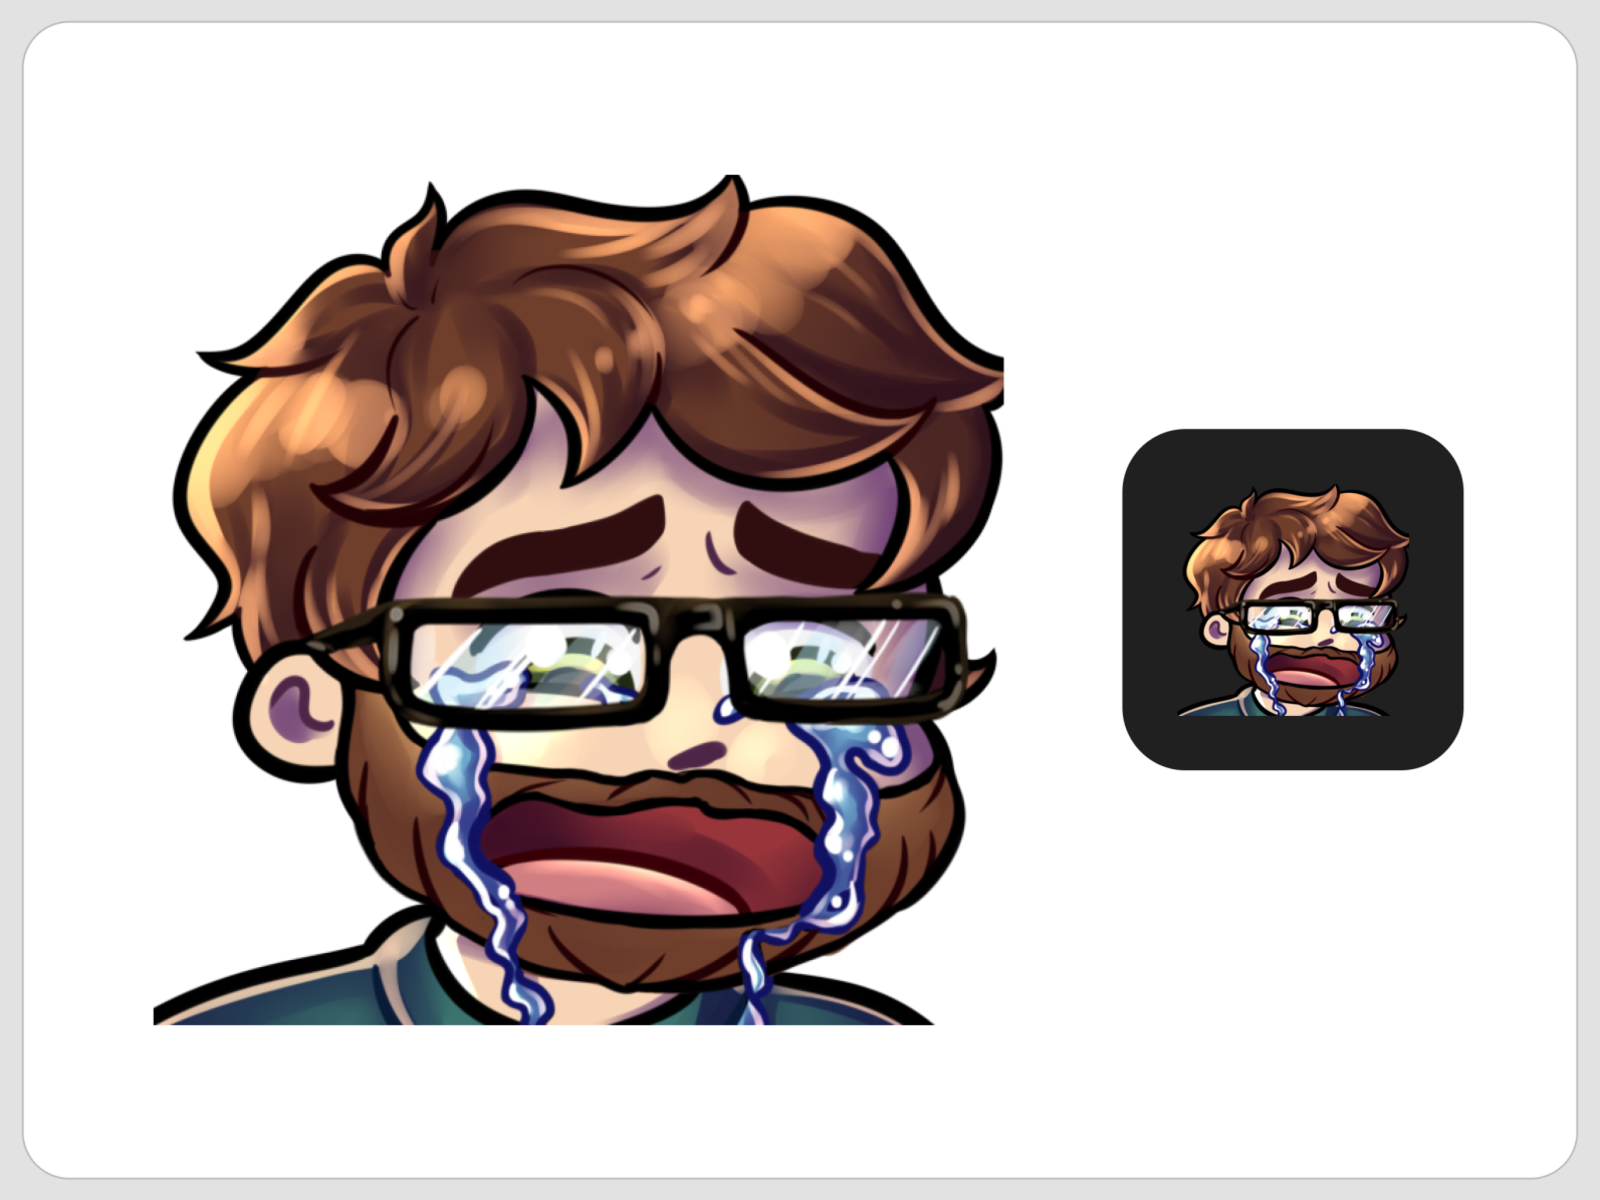 12 Brown Hair Beard And Glasses Chibi Boy Emotes For Twitch By Oksana Qoqsik On Dribbble 1501